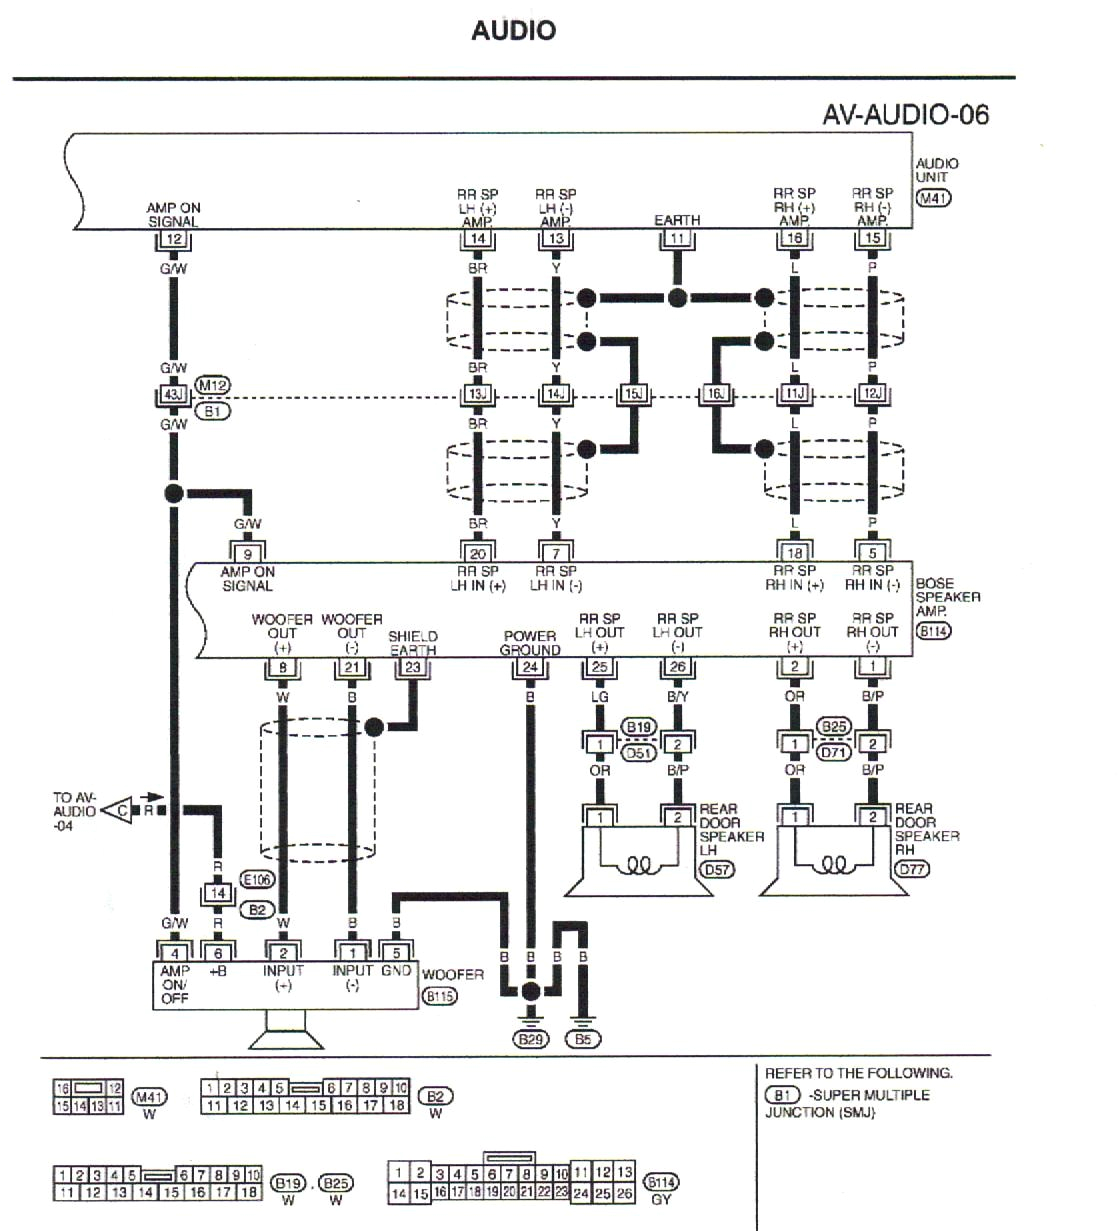 4 channel amp wiring diagram amplifier readingrat within car inside 4ch at 5 channel amp wiring diagram in 4ch amp wiring diagram jpg